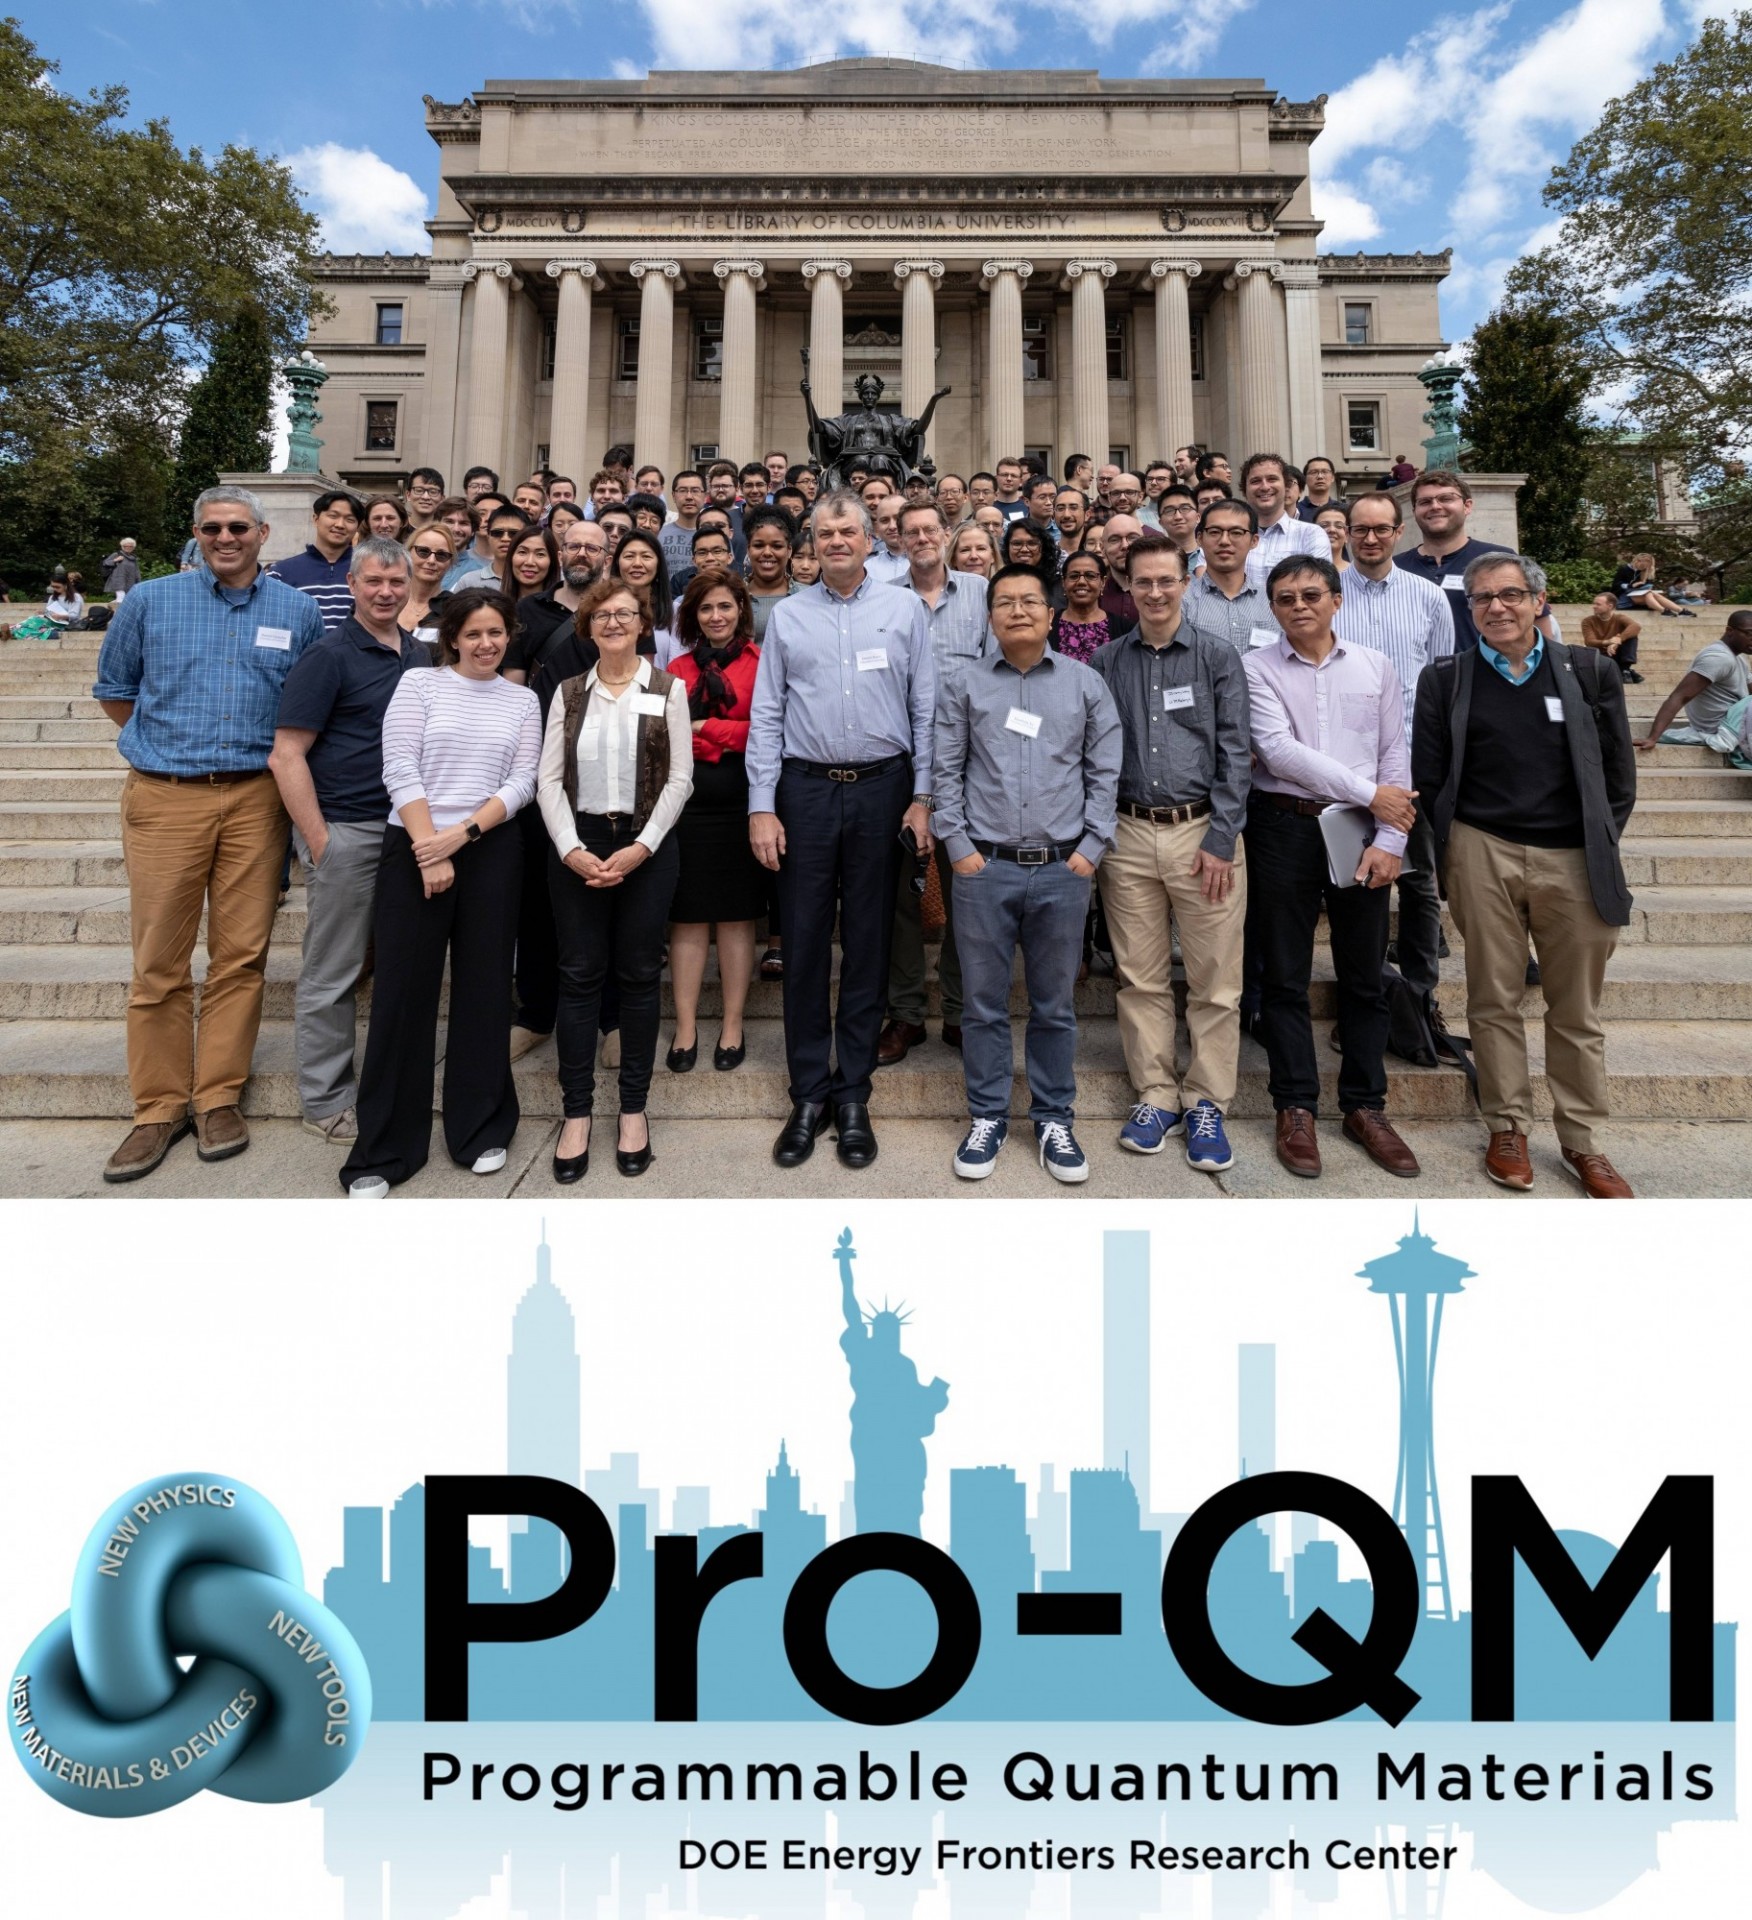 Image of researchers in front of Low Library with the Pro-QM Center's logo 